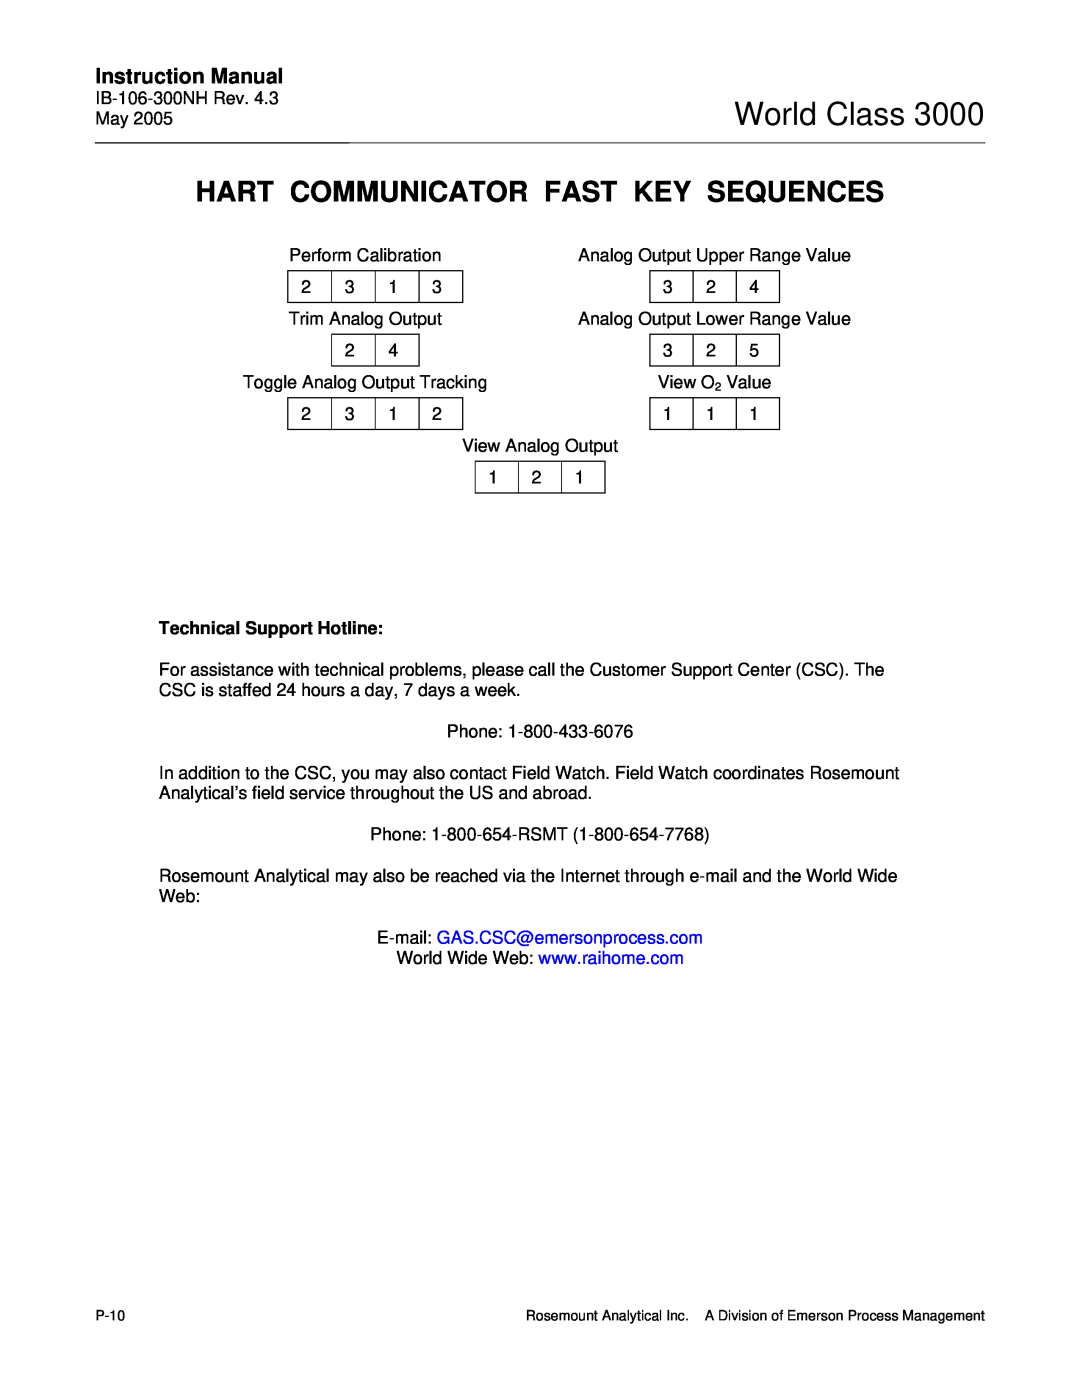 Emerson 3000 Hart Communicator Fast Key Sequences, World Class, Instruction Manual, Technical Support Hotline 